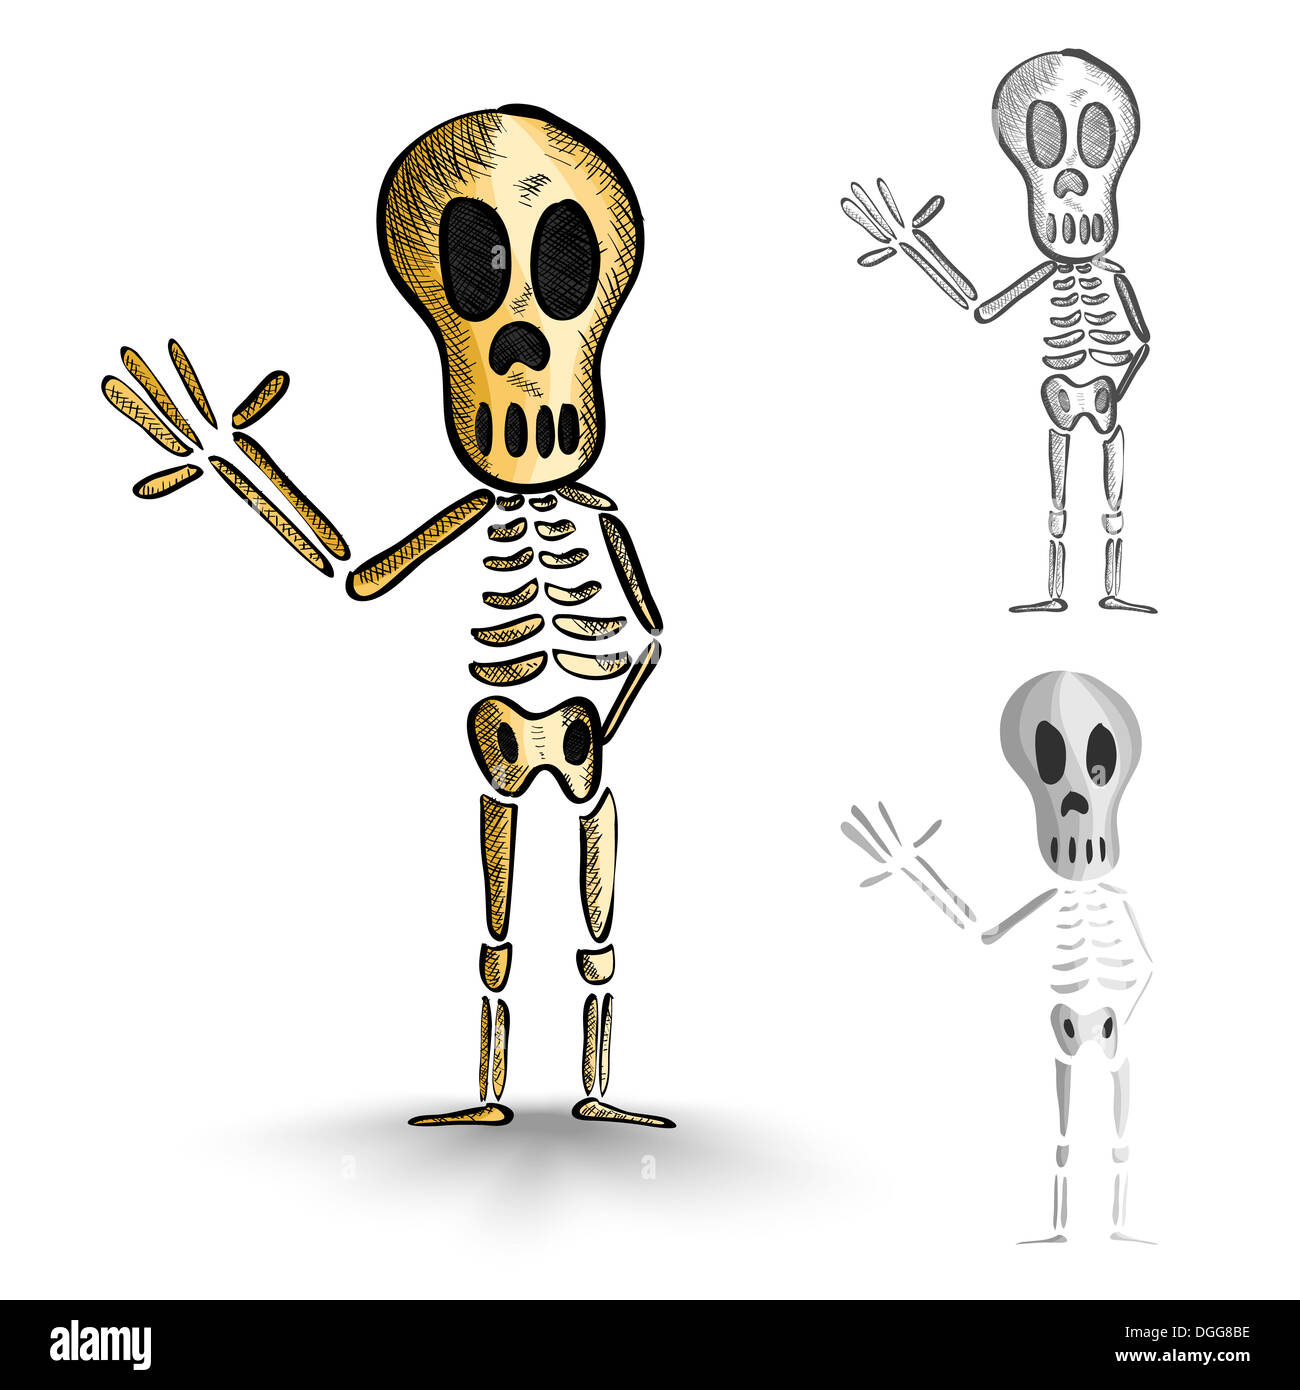 Halloween Monsters isolated spooky hand drawn human skeletons set. EPS10 vector file organized in layers for easy editing. Stock Photo